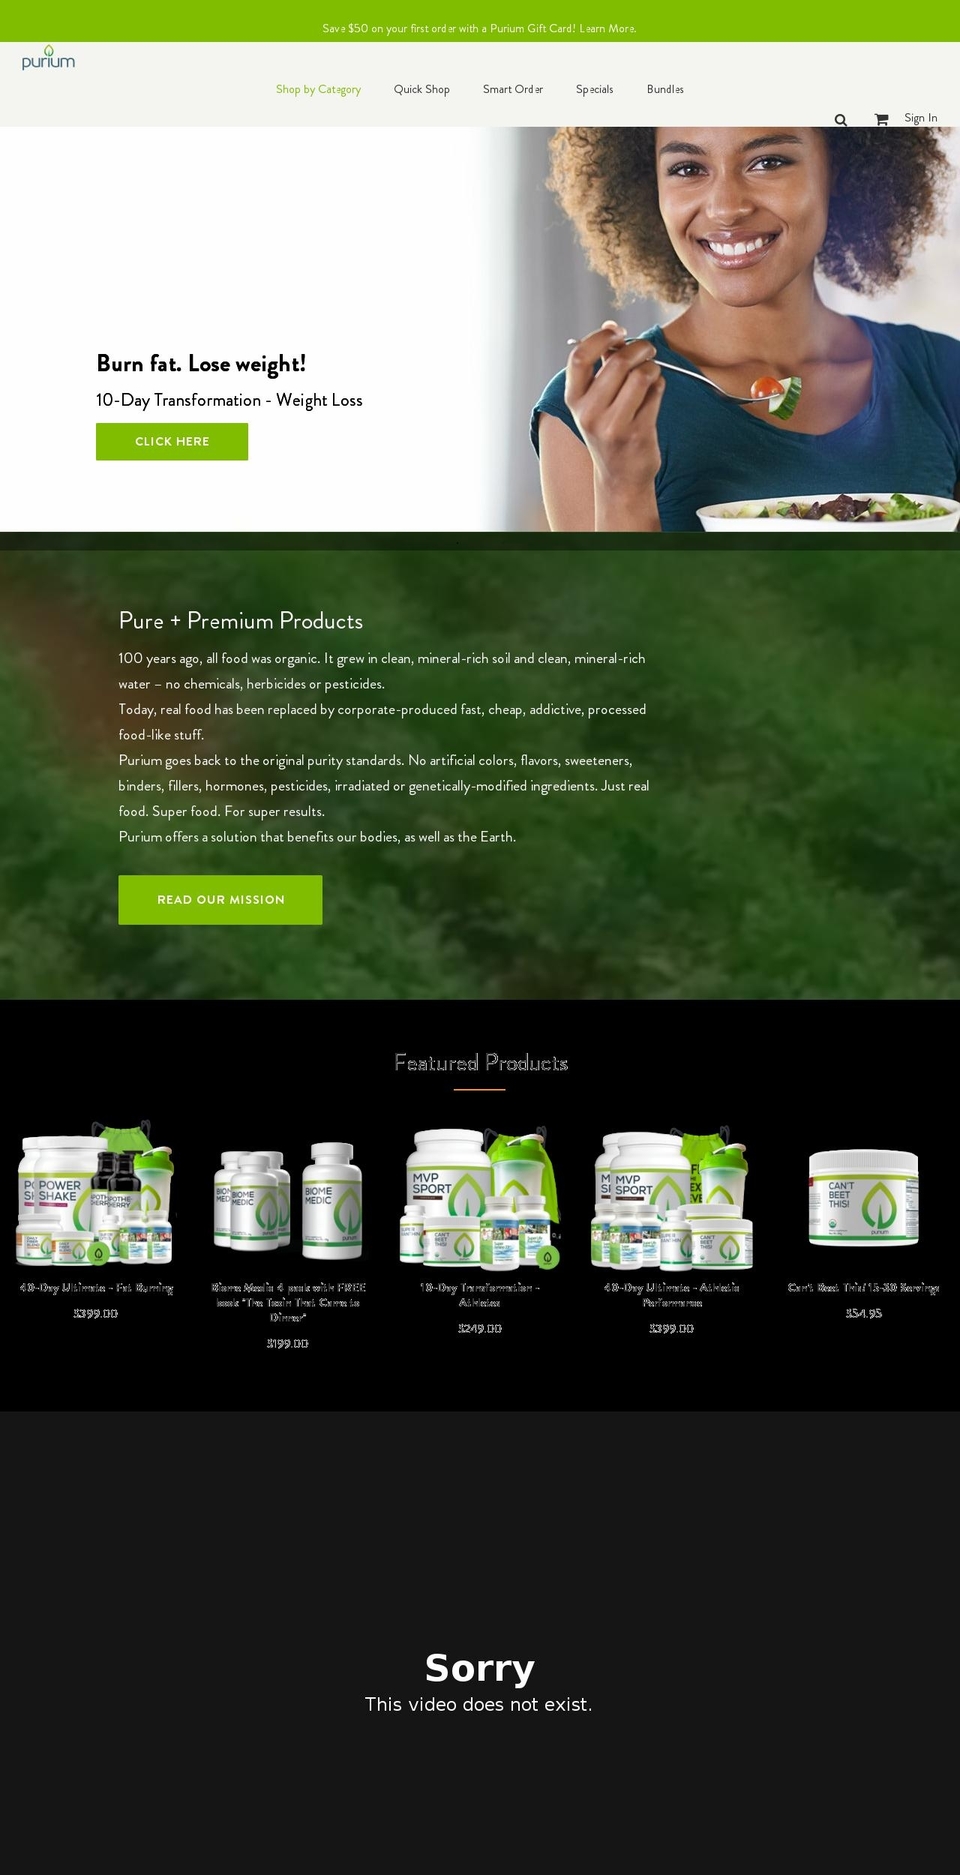 Production | BVA Shopify theme site example breakthroughrecovery.info